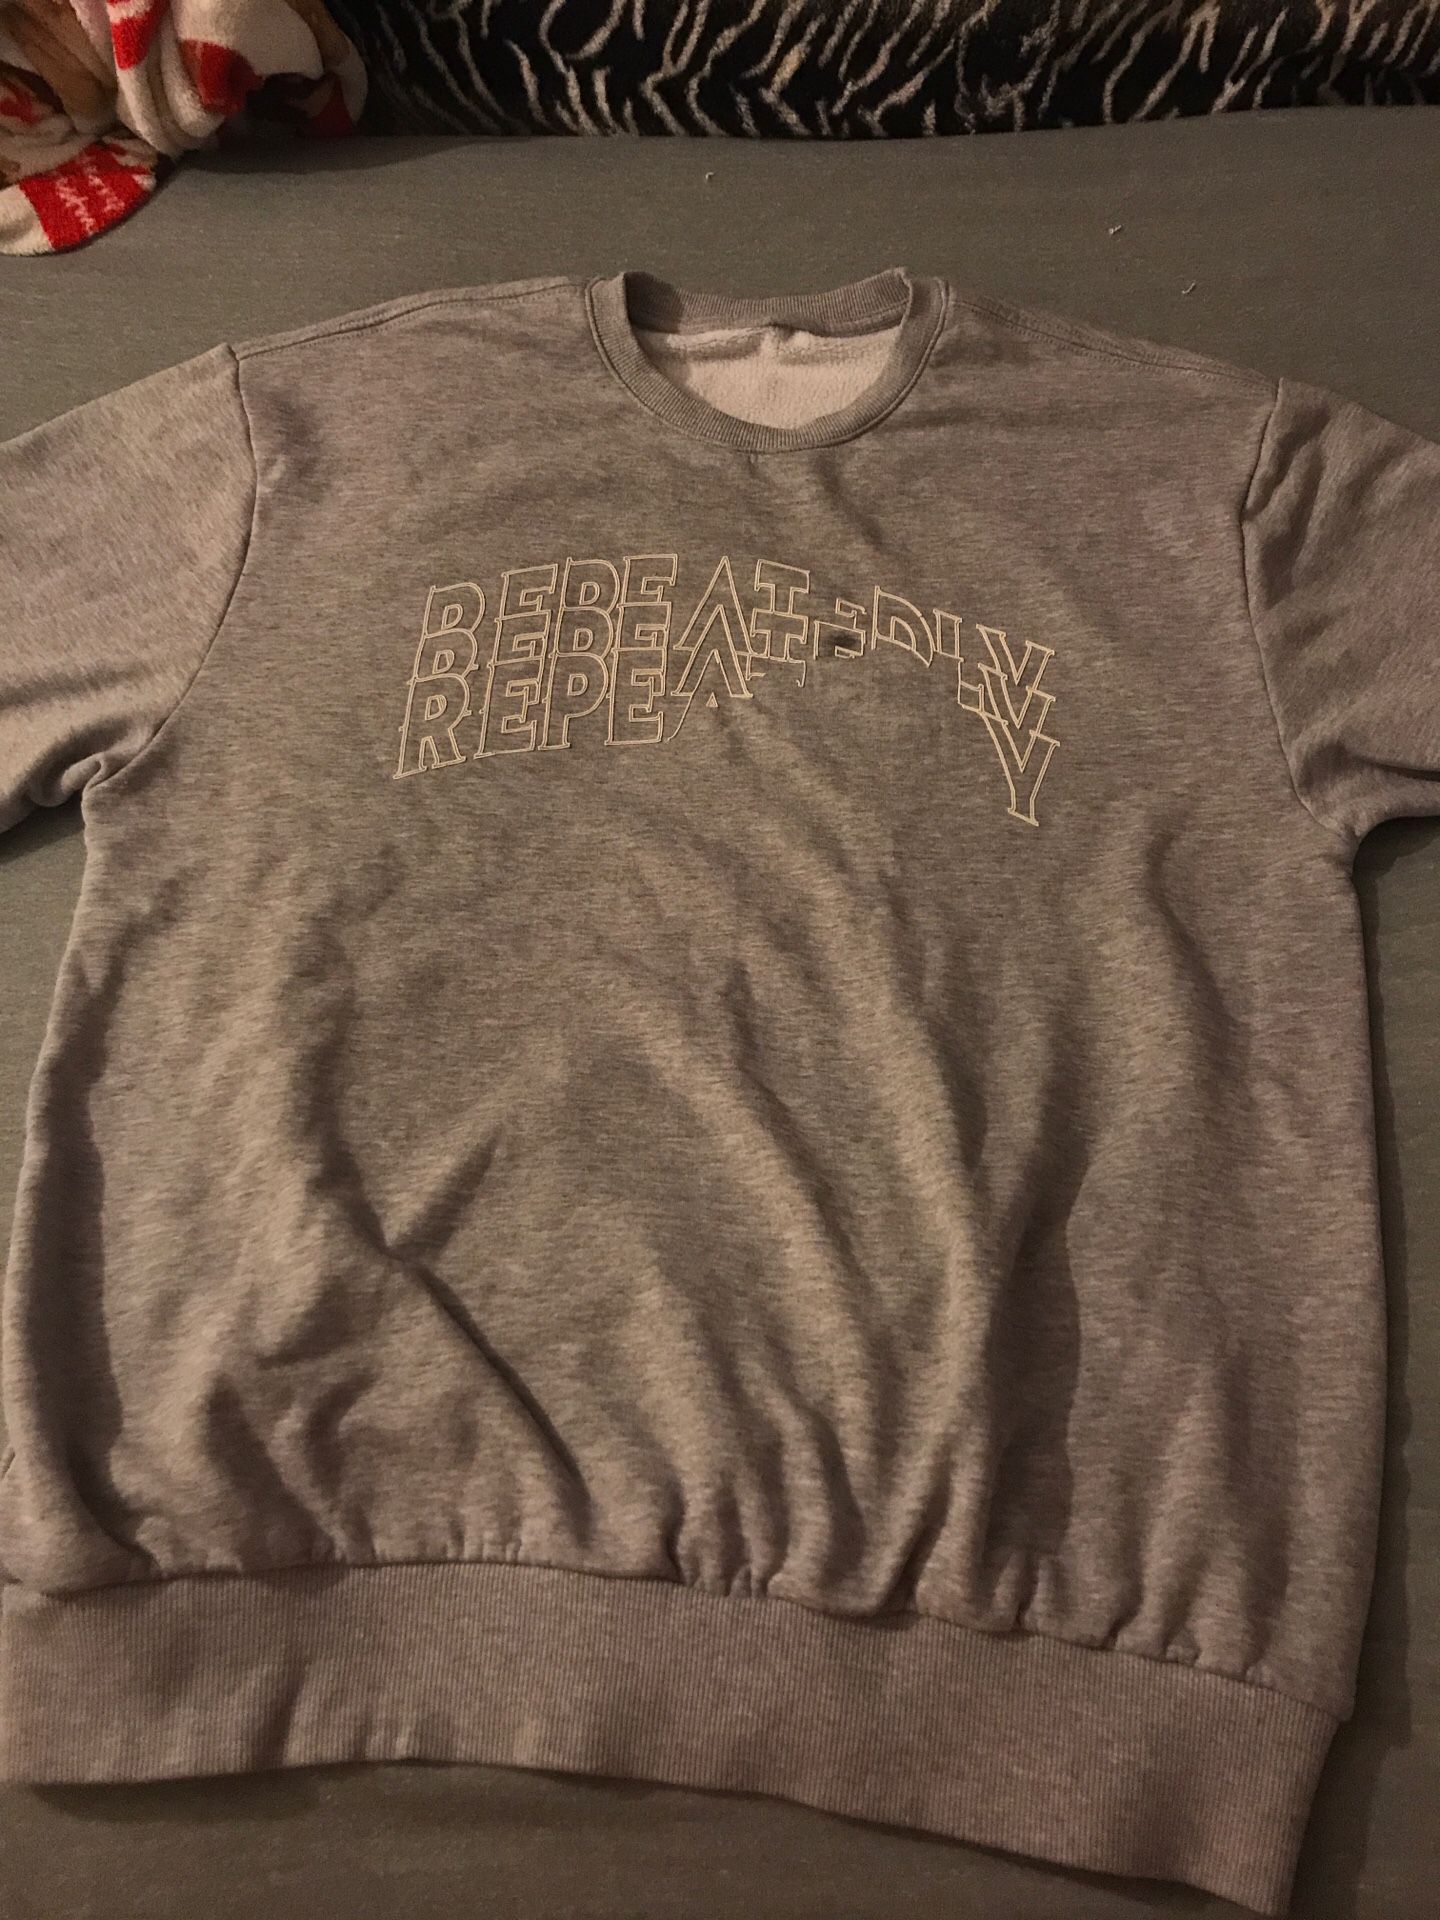 Repeatedly men’s H&M’s sweatshirt size large